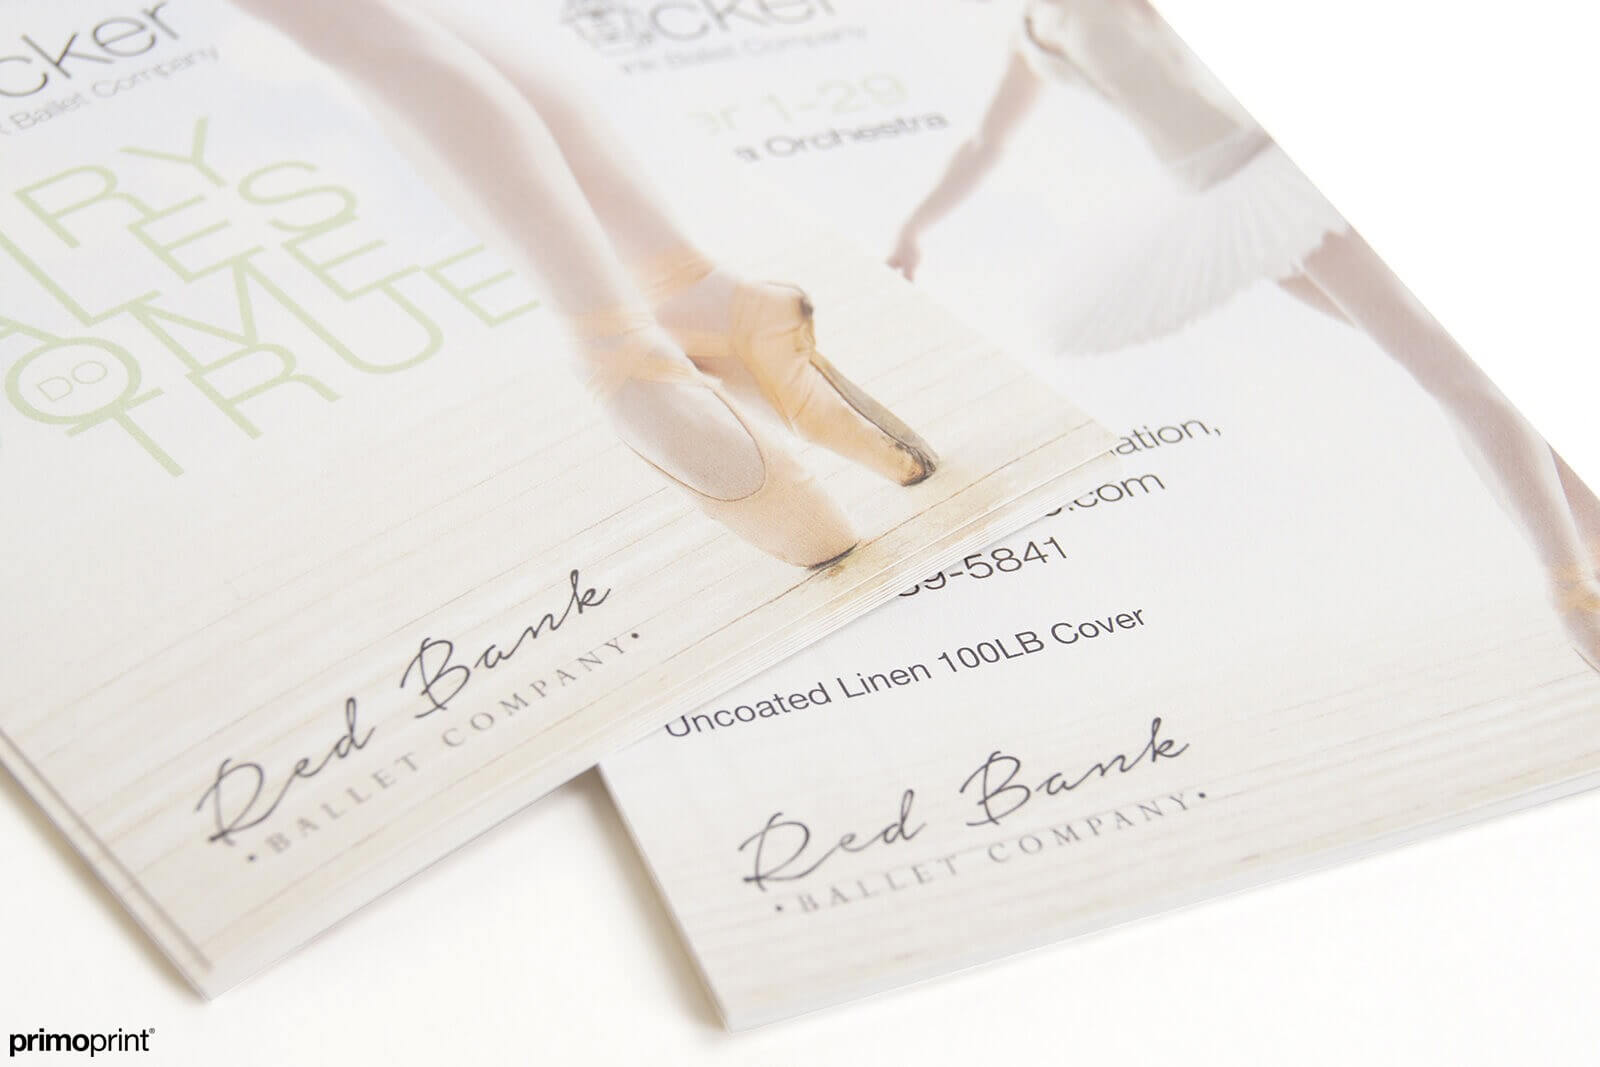 Uncoated Linen 100LB cover postcard designed by Primoprint.